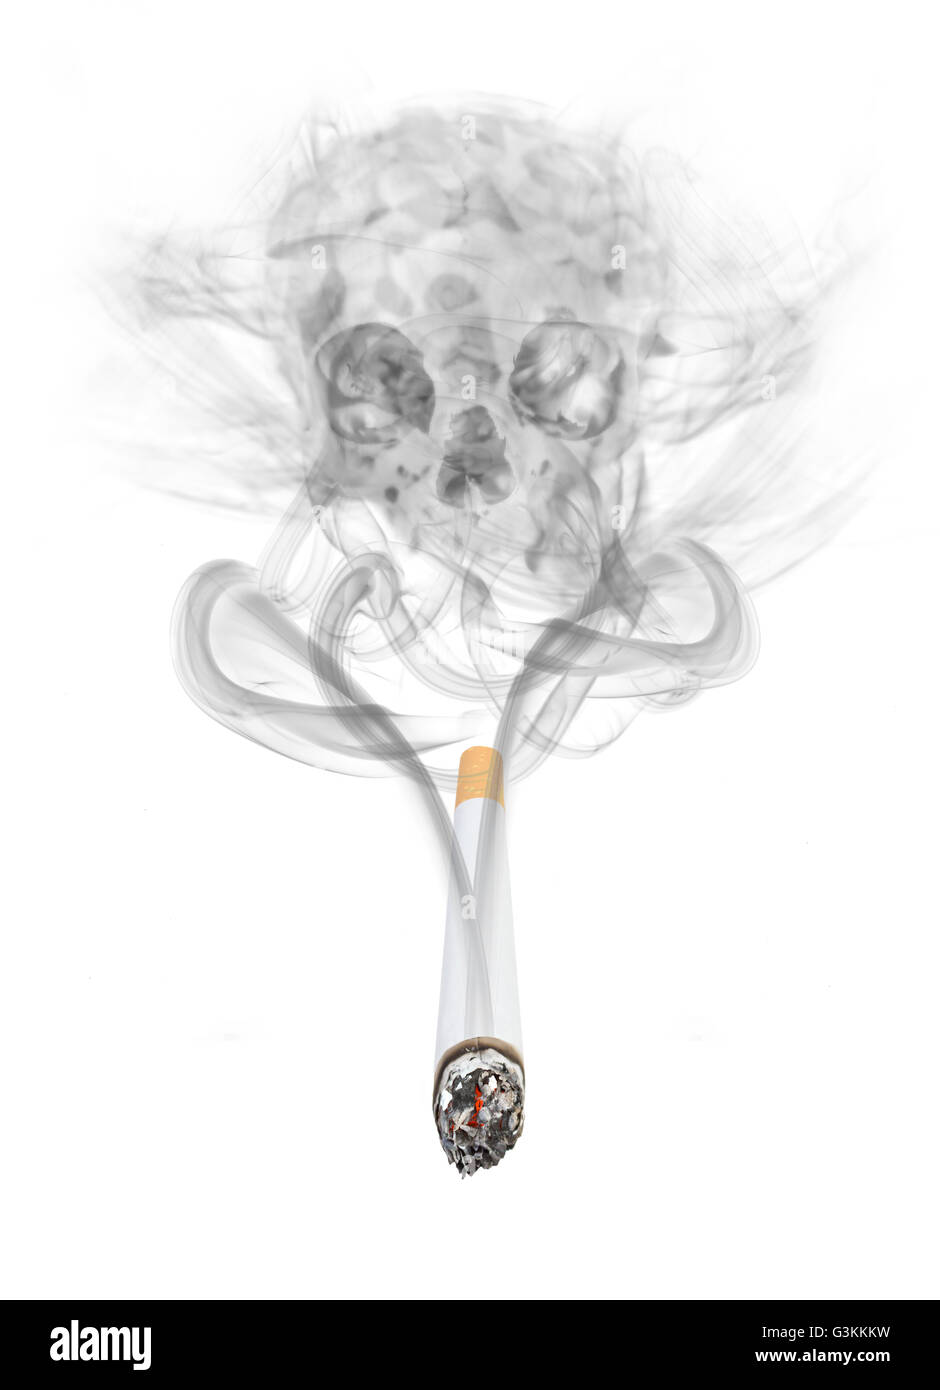 concept of smoke rising from cigarette forming a skull Stock Photo